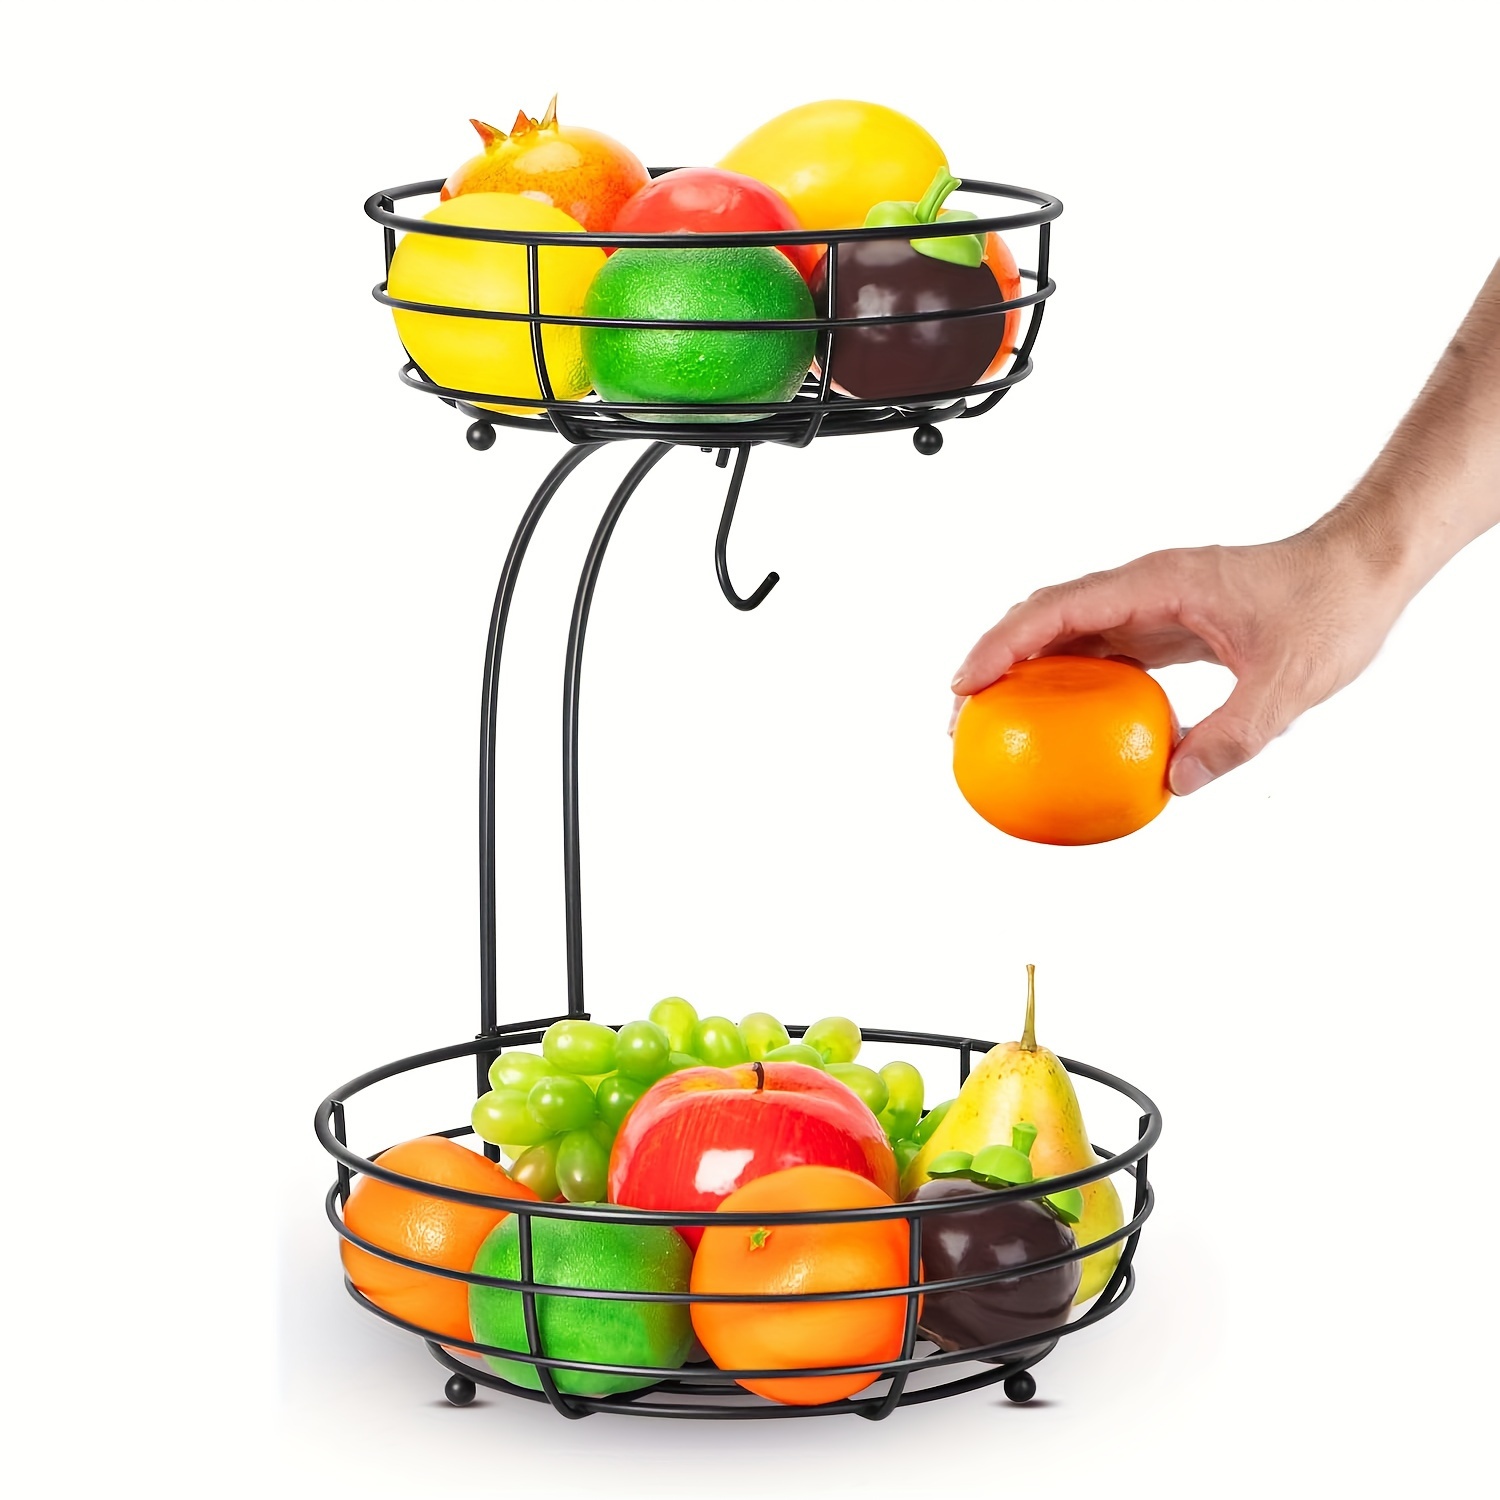 

1pc 2-tier Countertop Fruit Basket Bowl With Banana Hanger, Metal Wire Vegetable And Fruit Produce Storage Baskets For Kitchen, Fruits Stand Holder Organizer For Bread Snack Veggies, Black